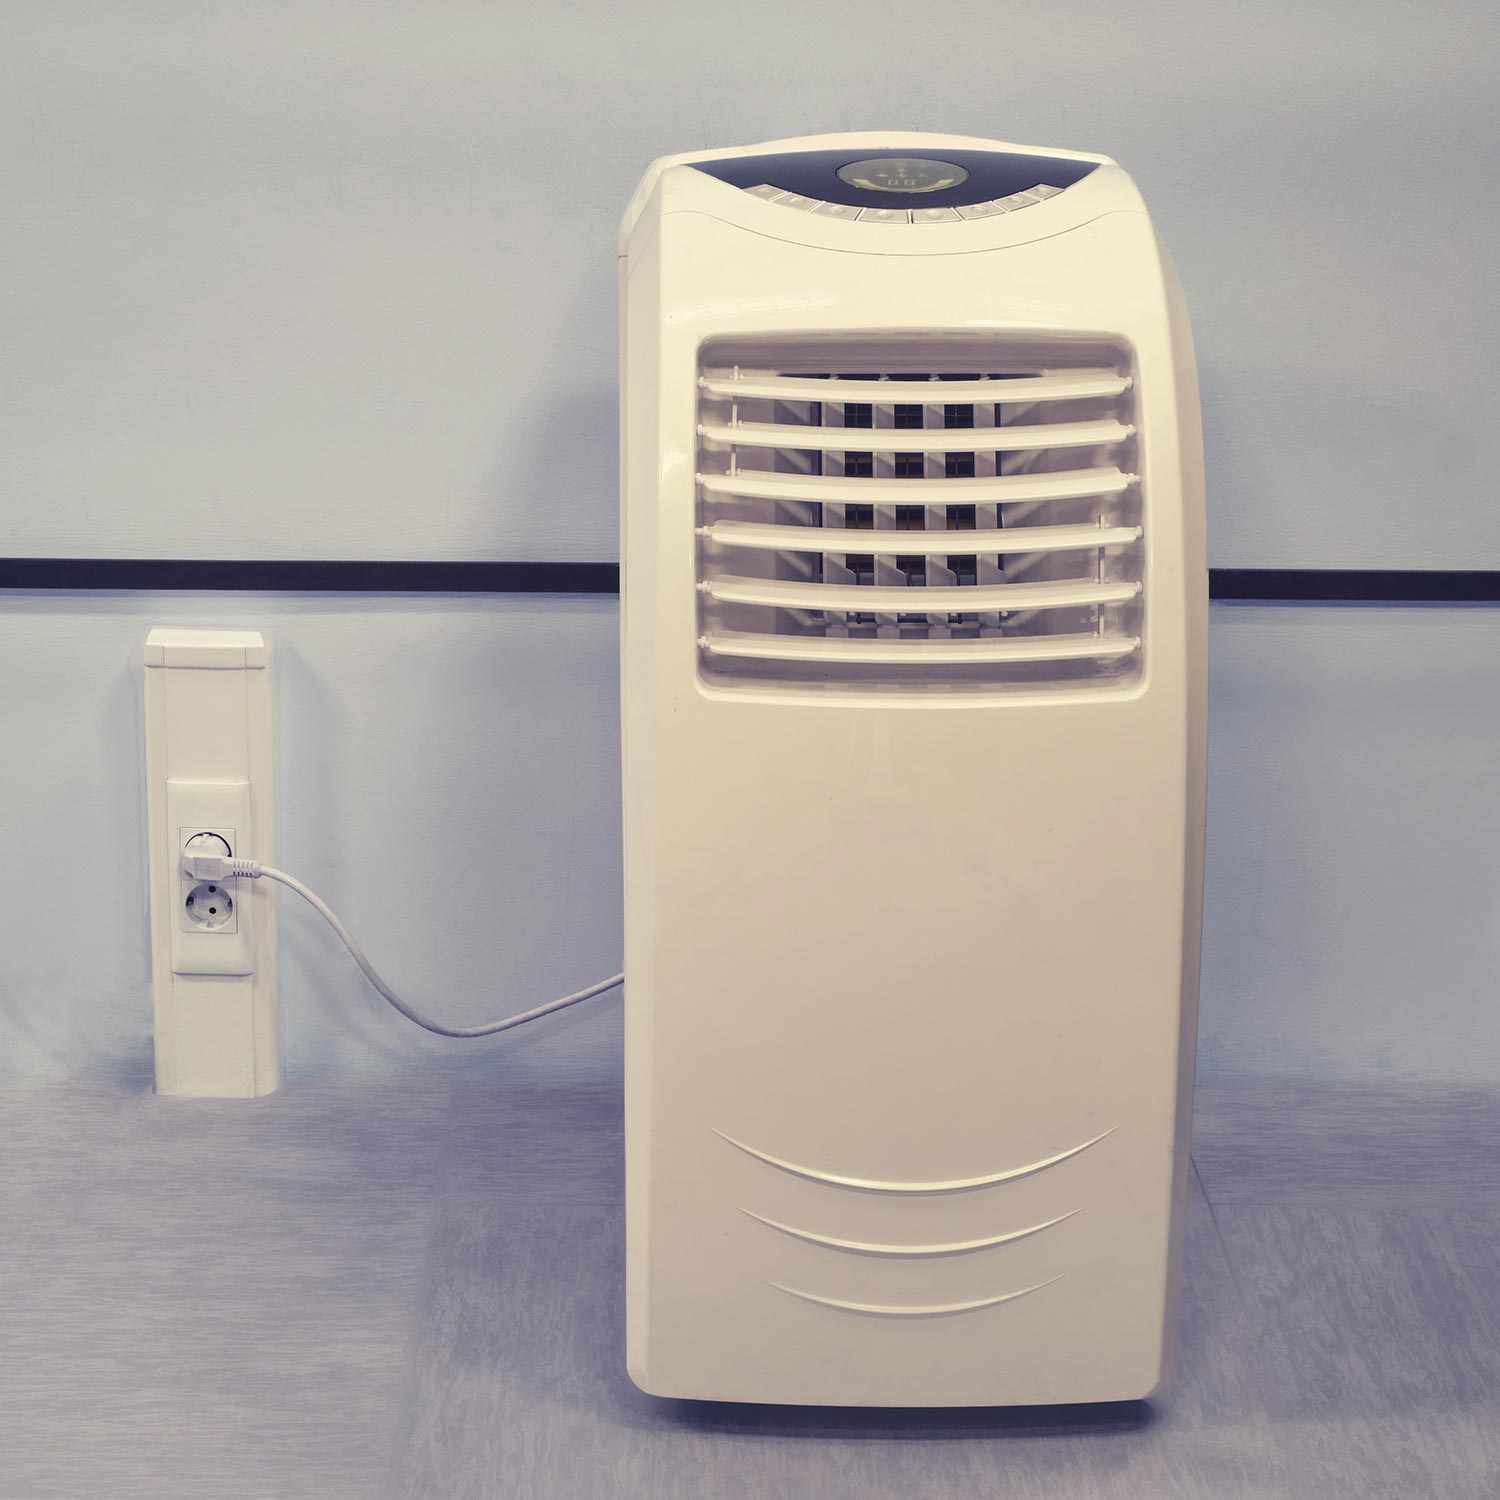 Portable air conditioner in the office